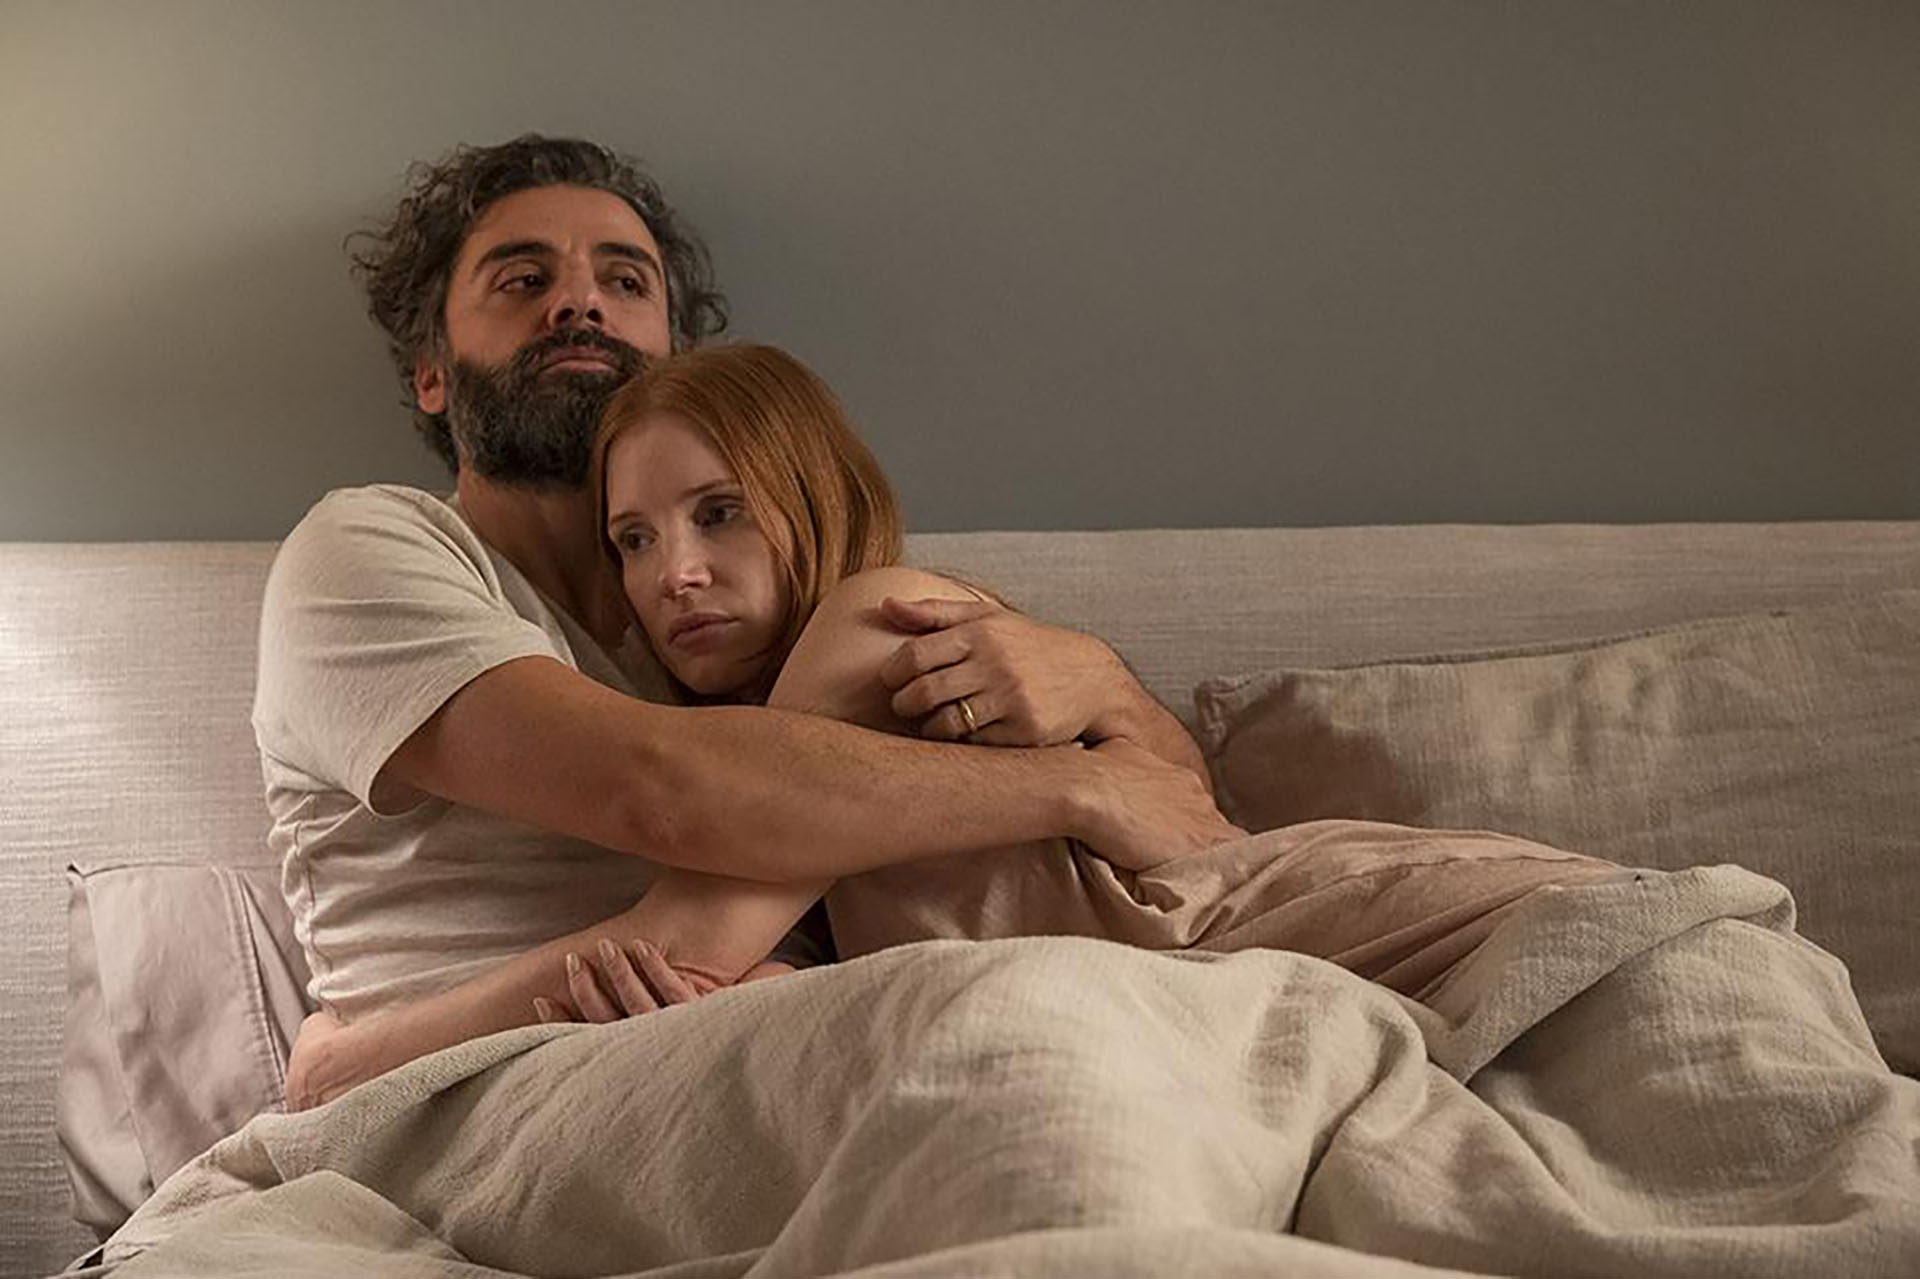 scenes-from-a-marriage-jessica-chastain-oscar-isaac